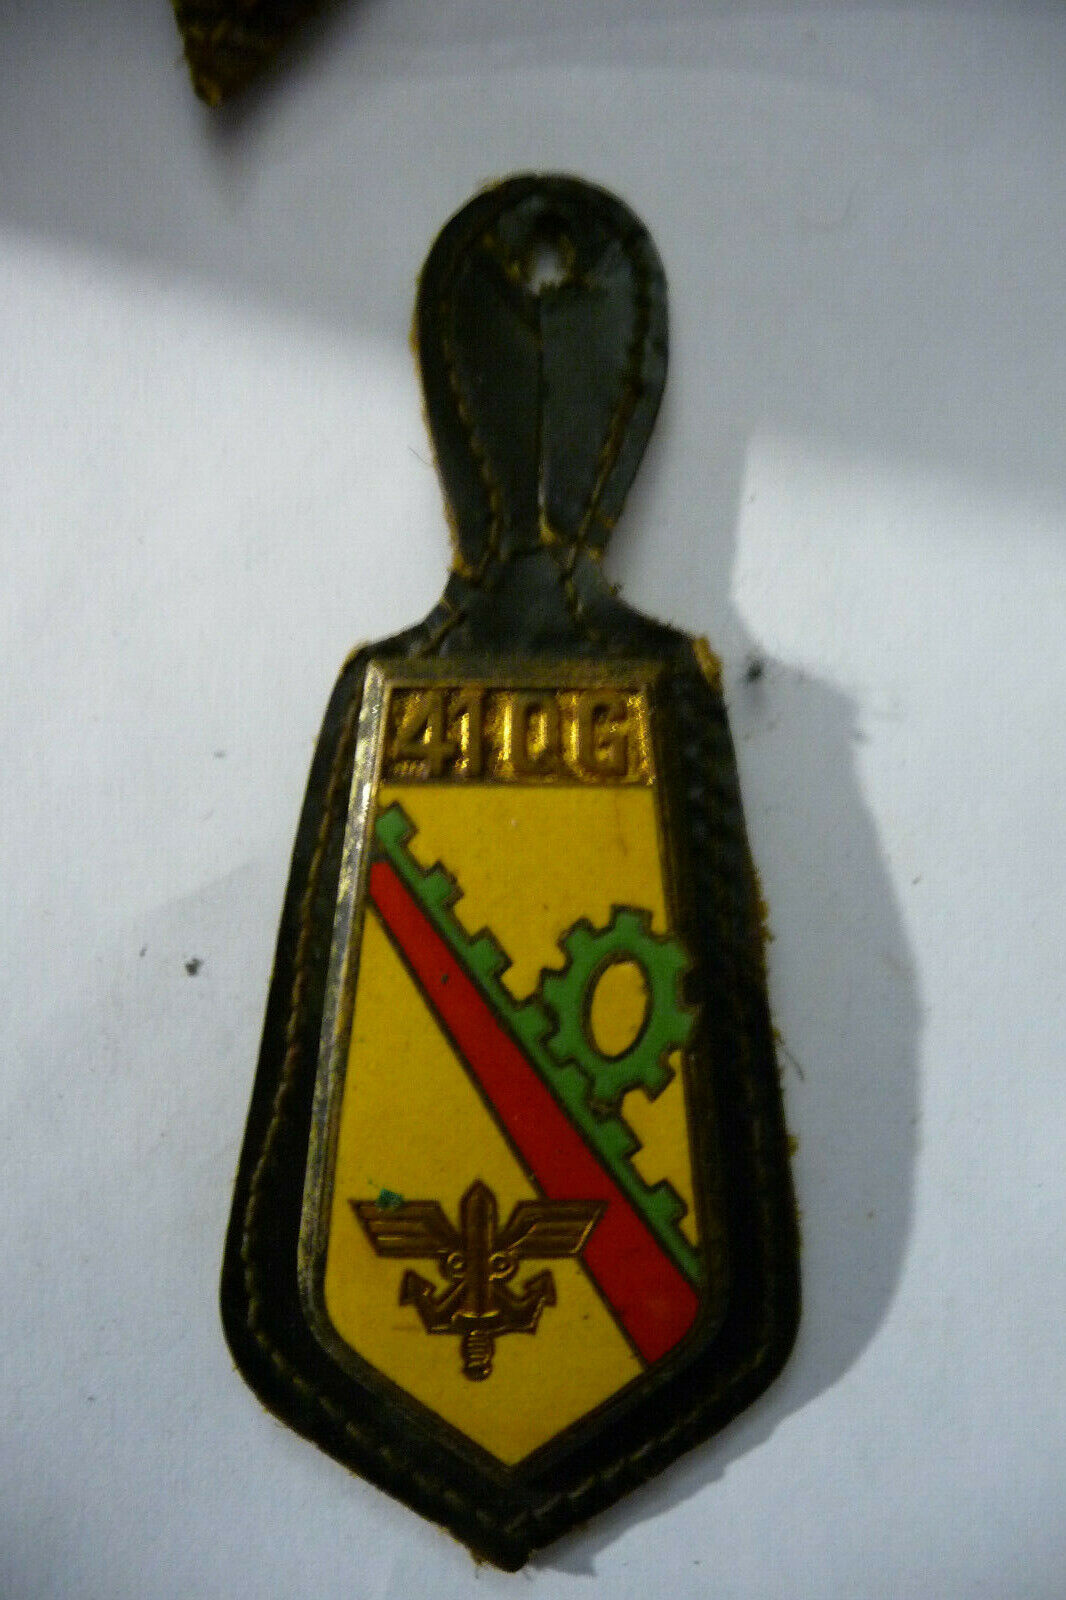 Drago Maid Medal G1956 41st Group Headquarters French Army HQ 41